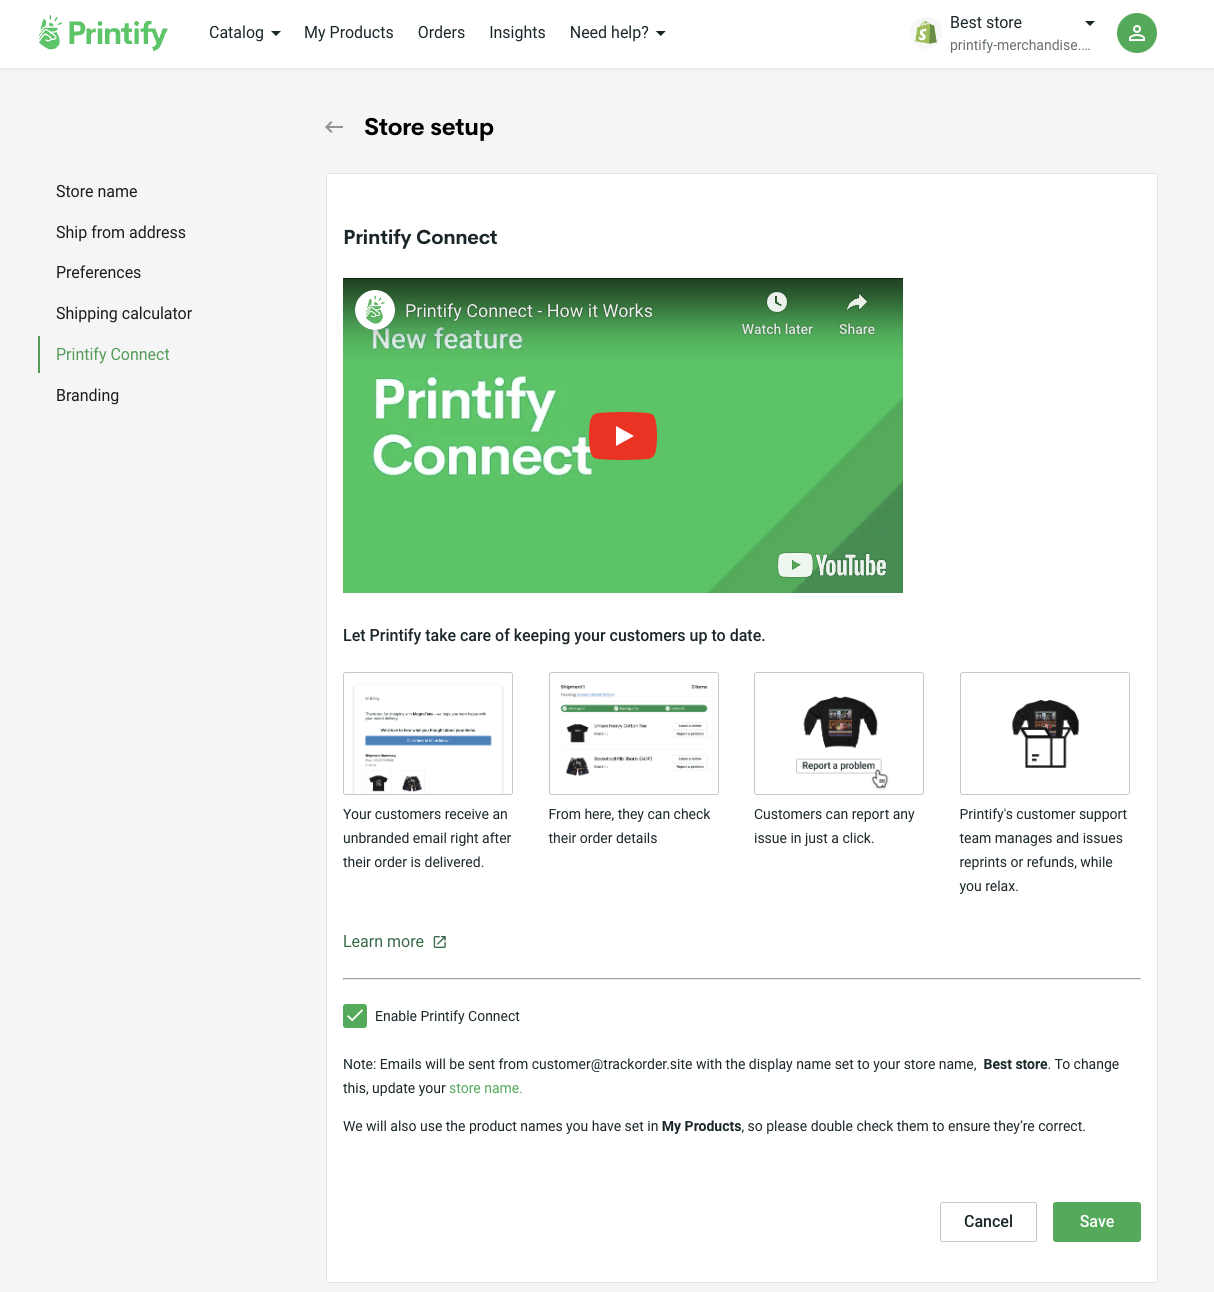 Printify Connect section of the “Store setup” page with the “Enable Printify Connect” box checked.